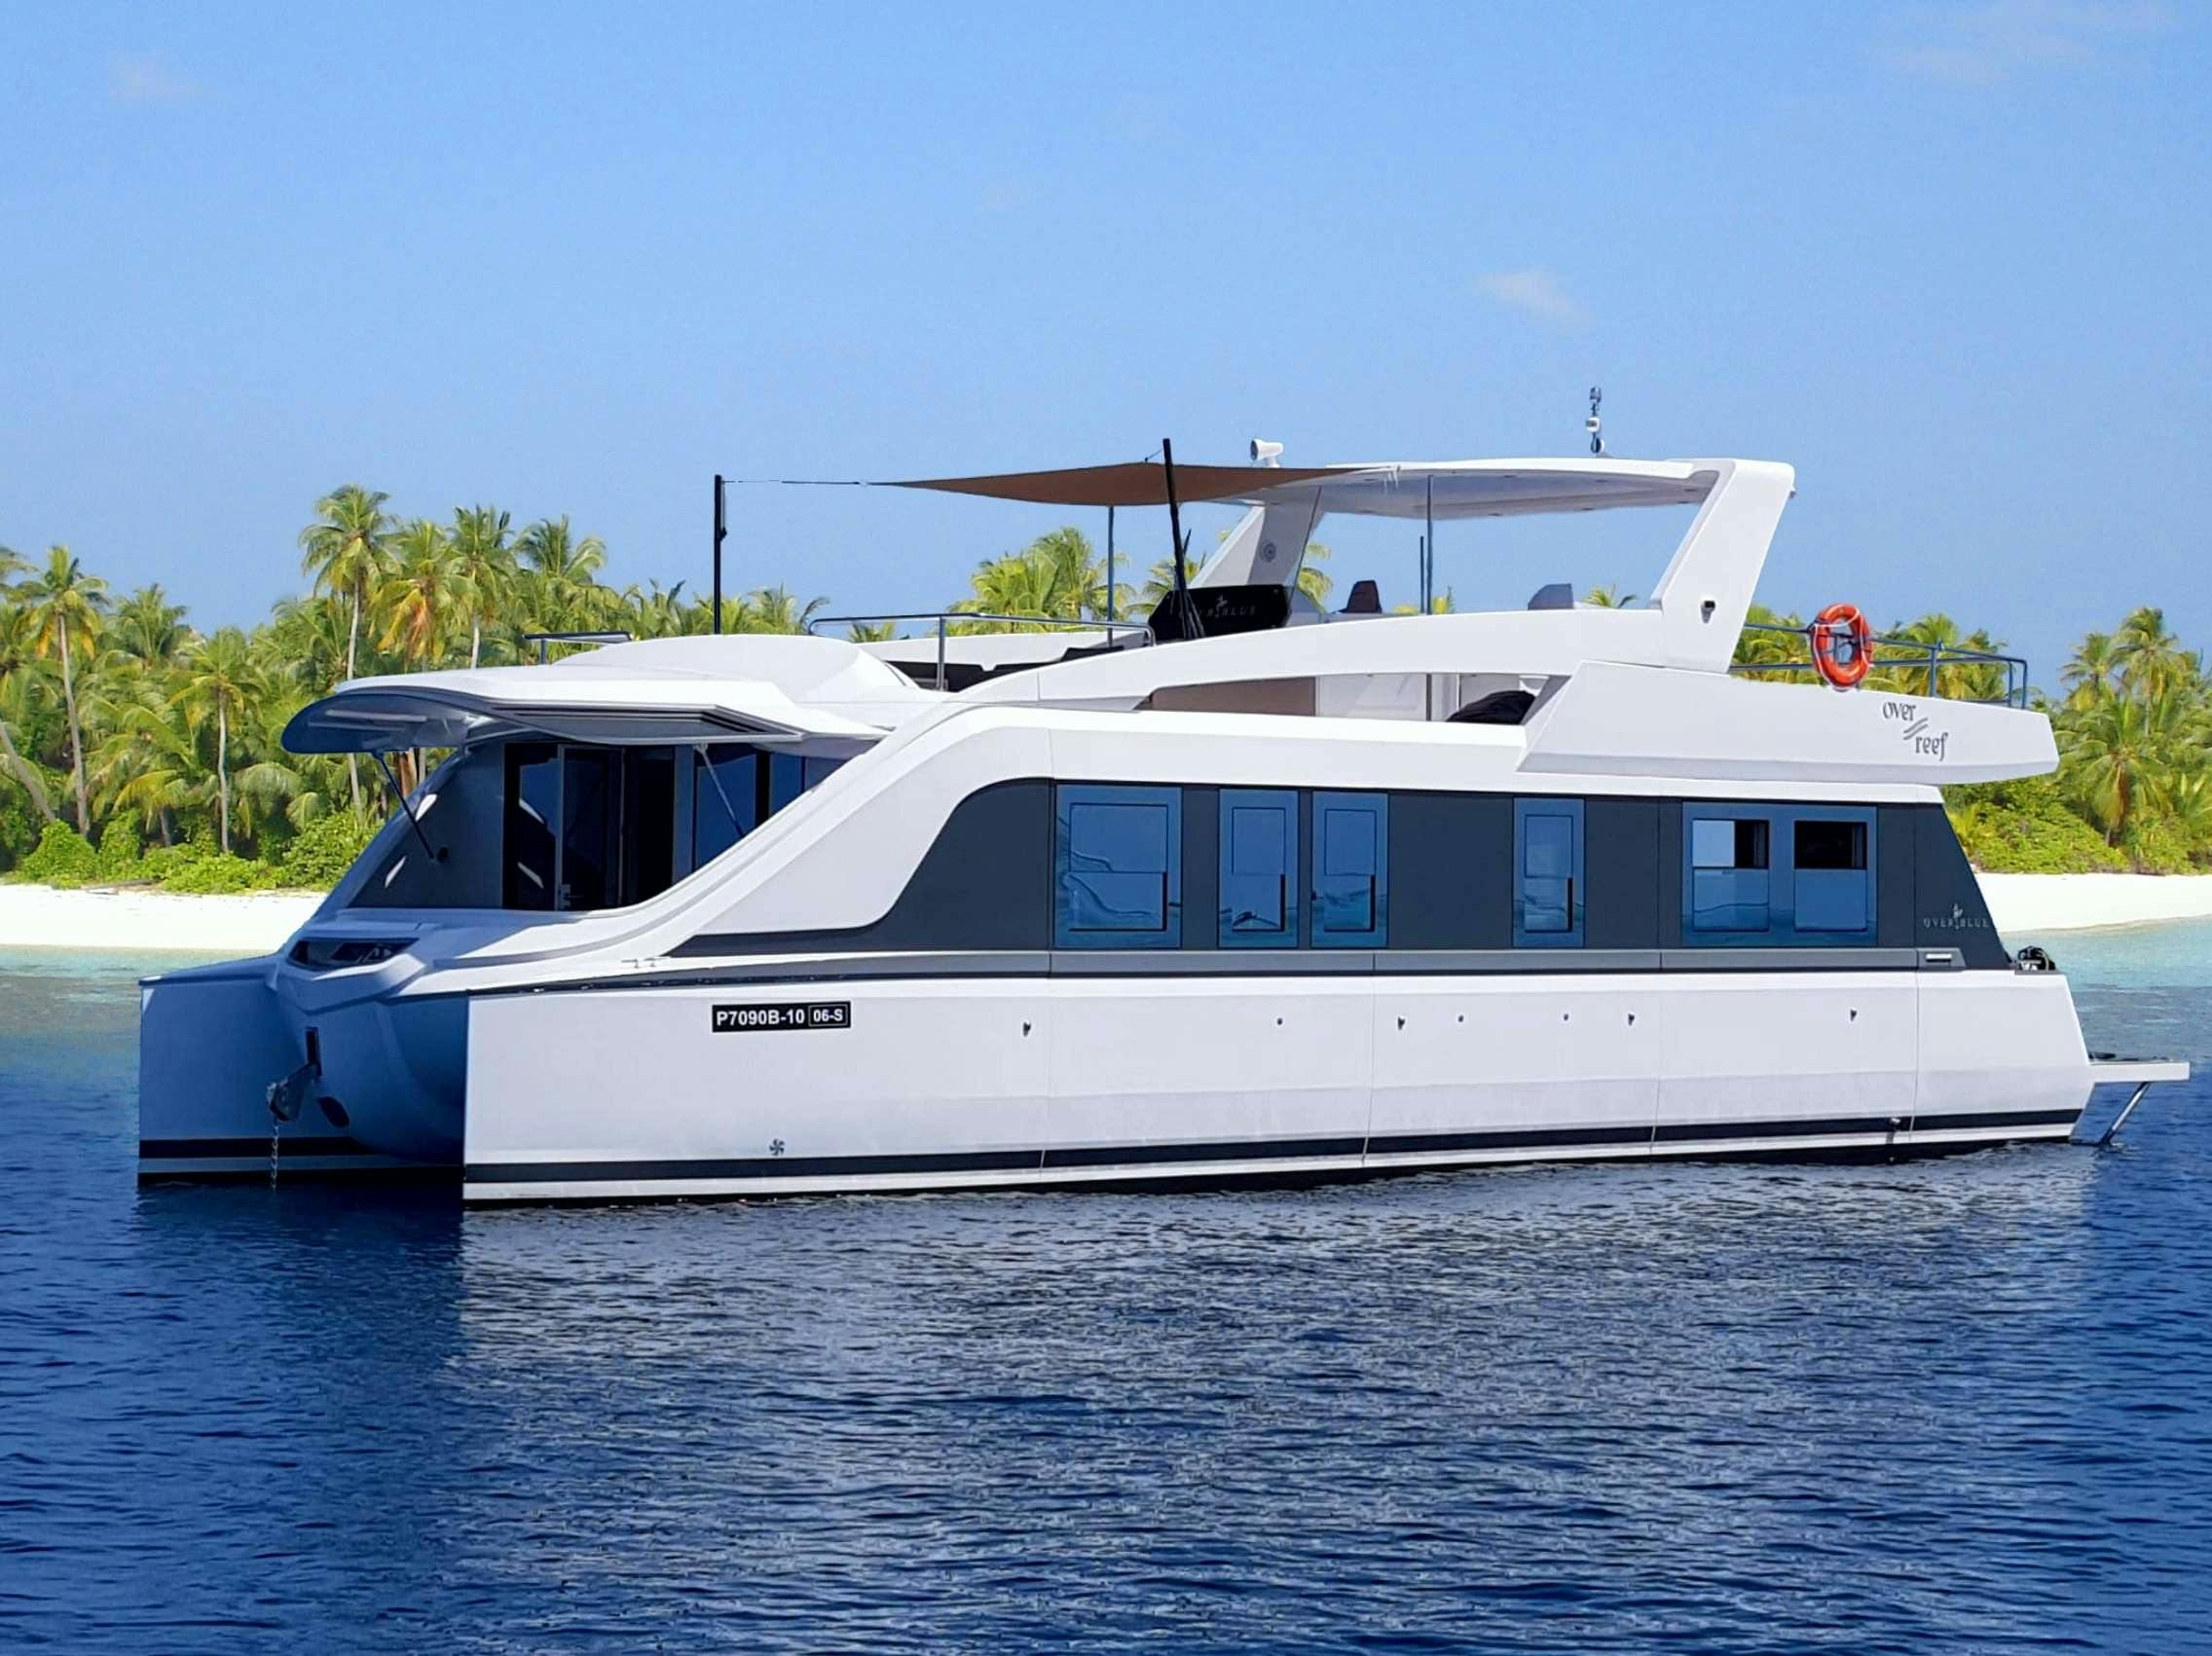 OVER REEF - Yacht Charter Maldives & Boat hire in Indian Ocean & SE Asia 1